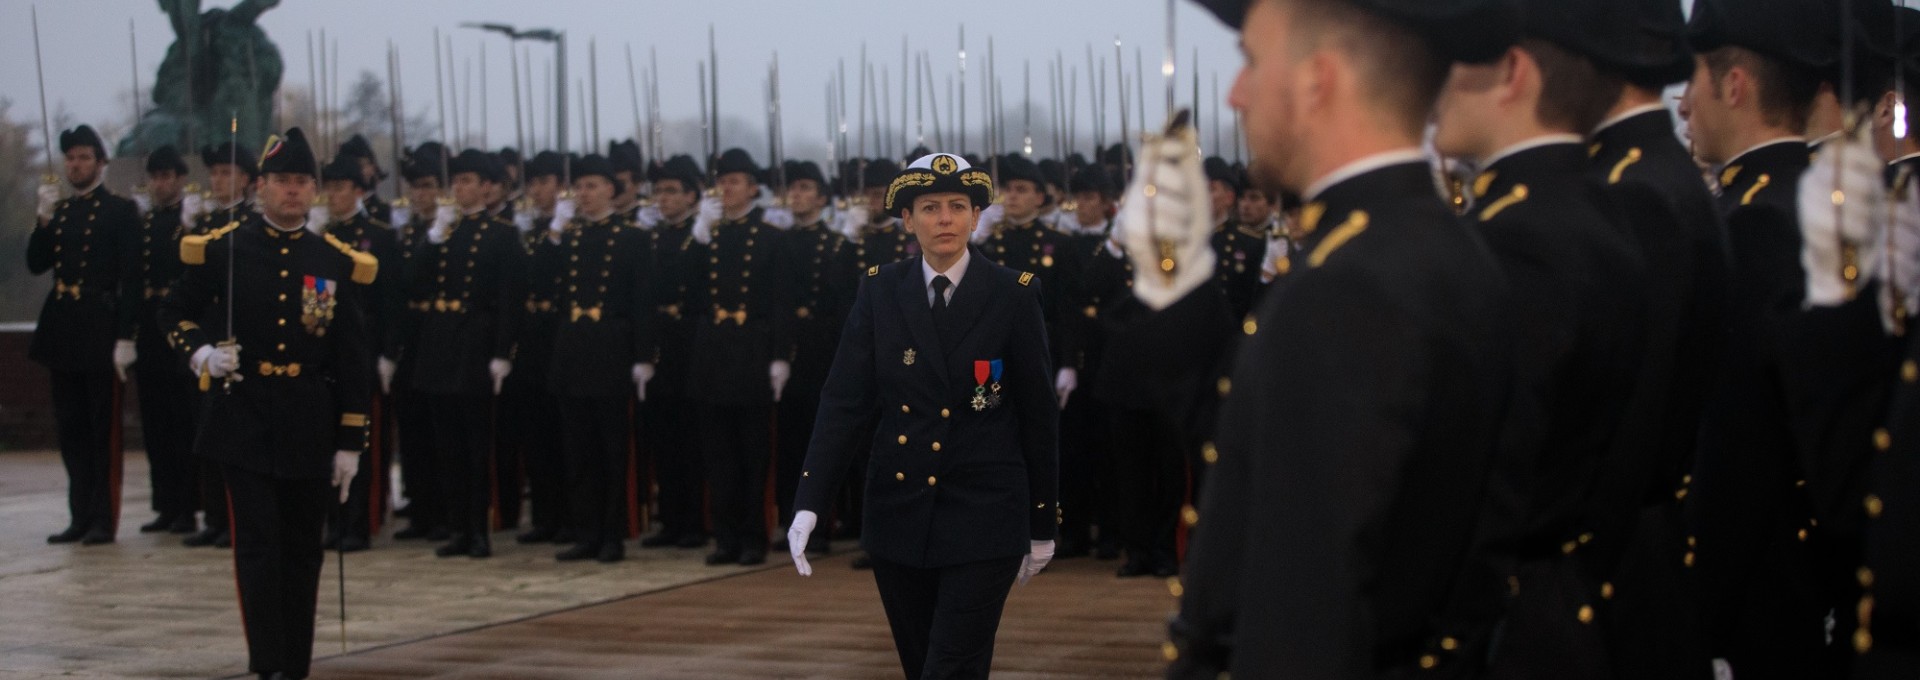 École Polytechnique reaffirms its link with the Armed Forces for Saint Barbara's Day